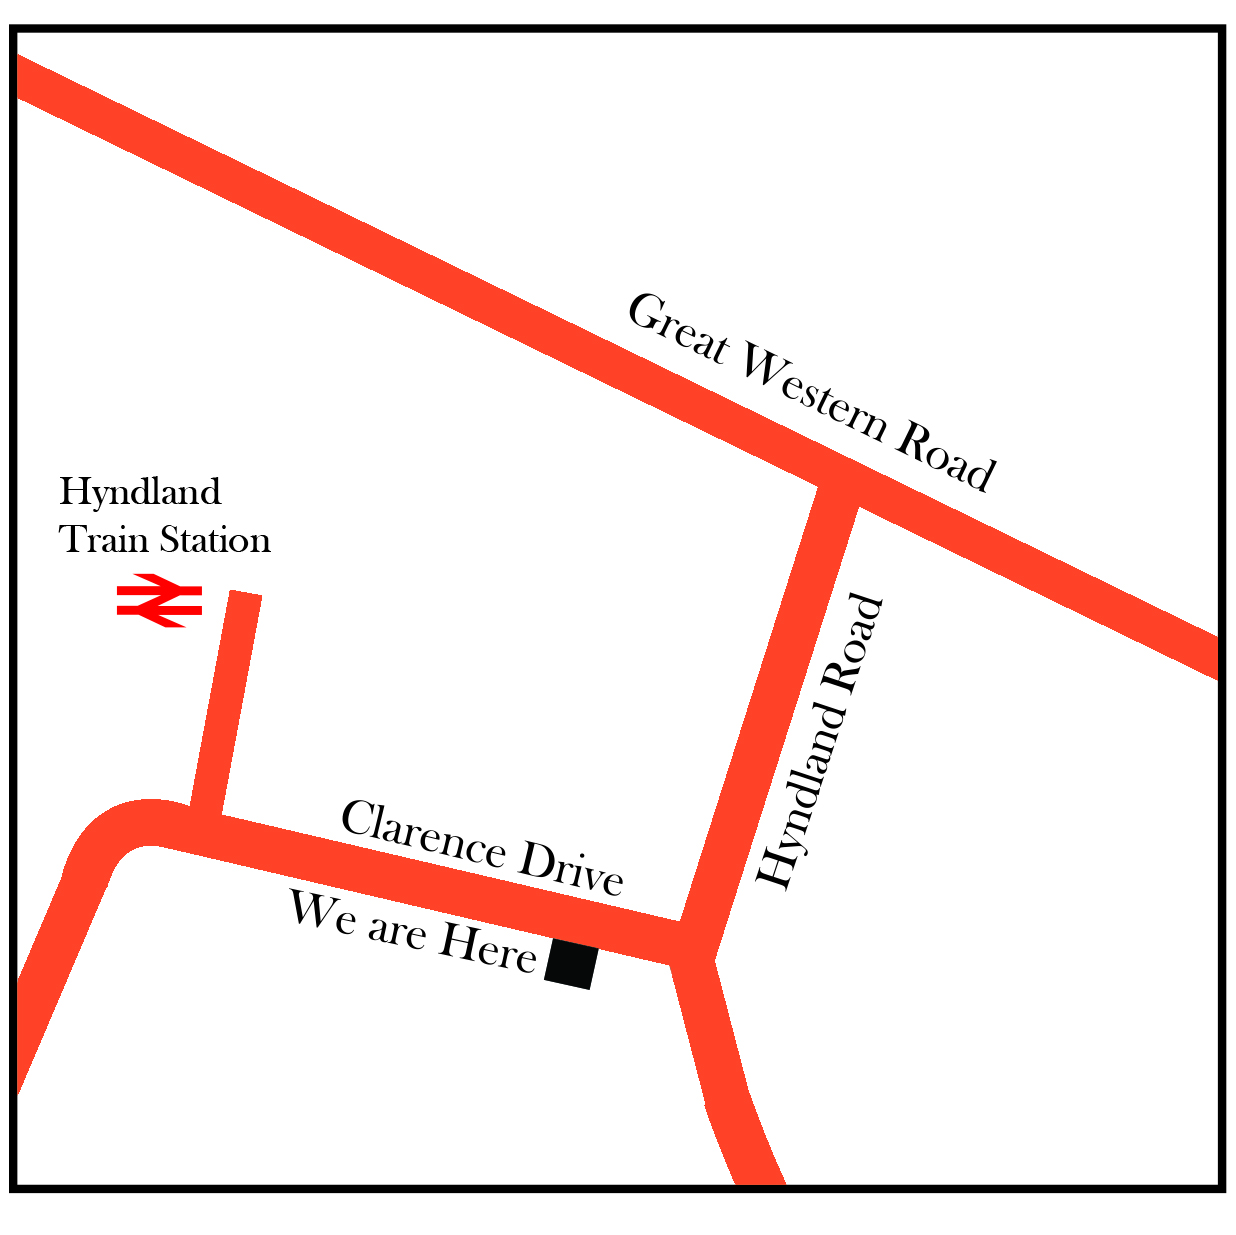 Graphical map showing the location of The Good Spirits Co. Hyndland shop at 21 Clarence Drive in Glasgow, UK